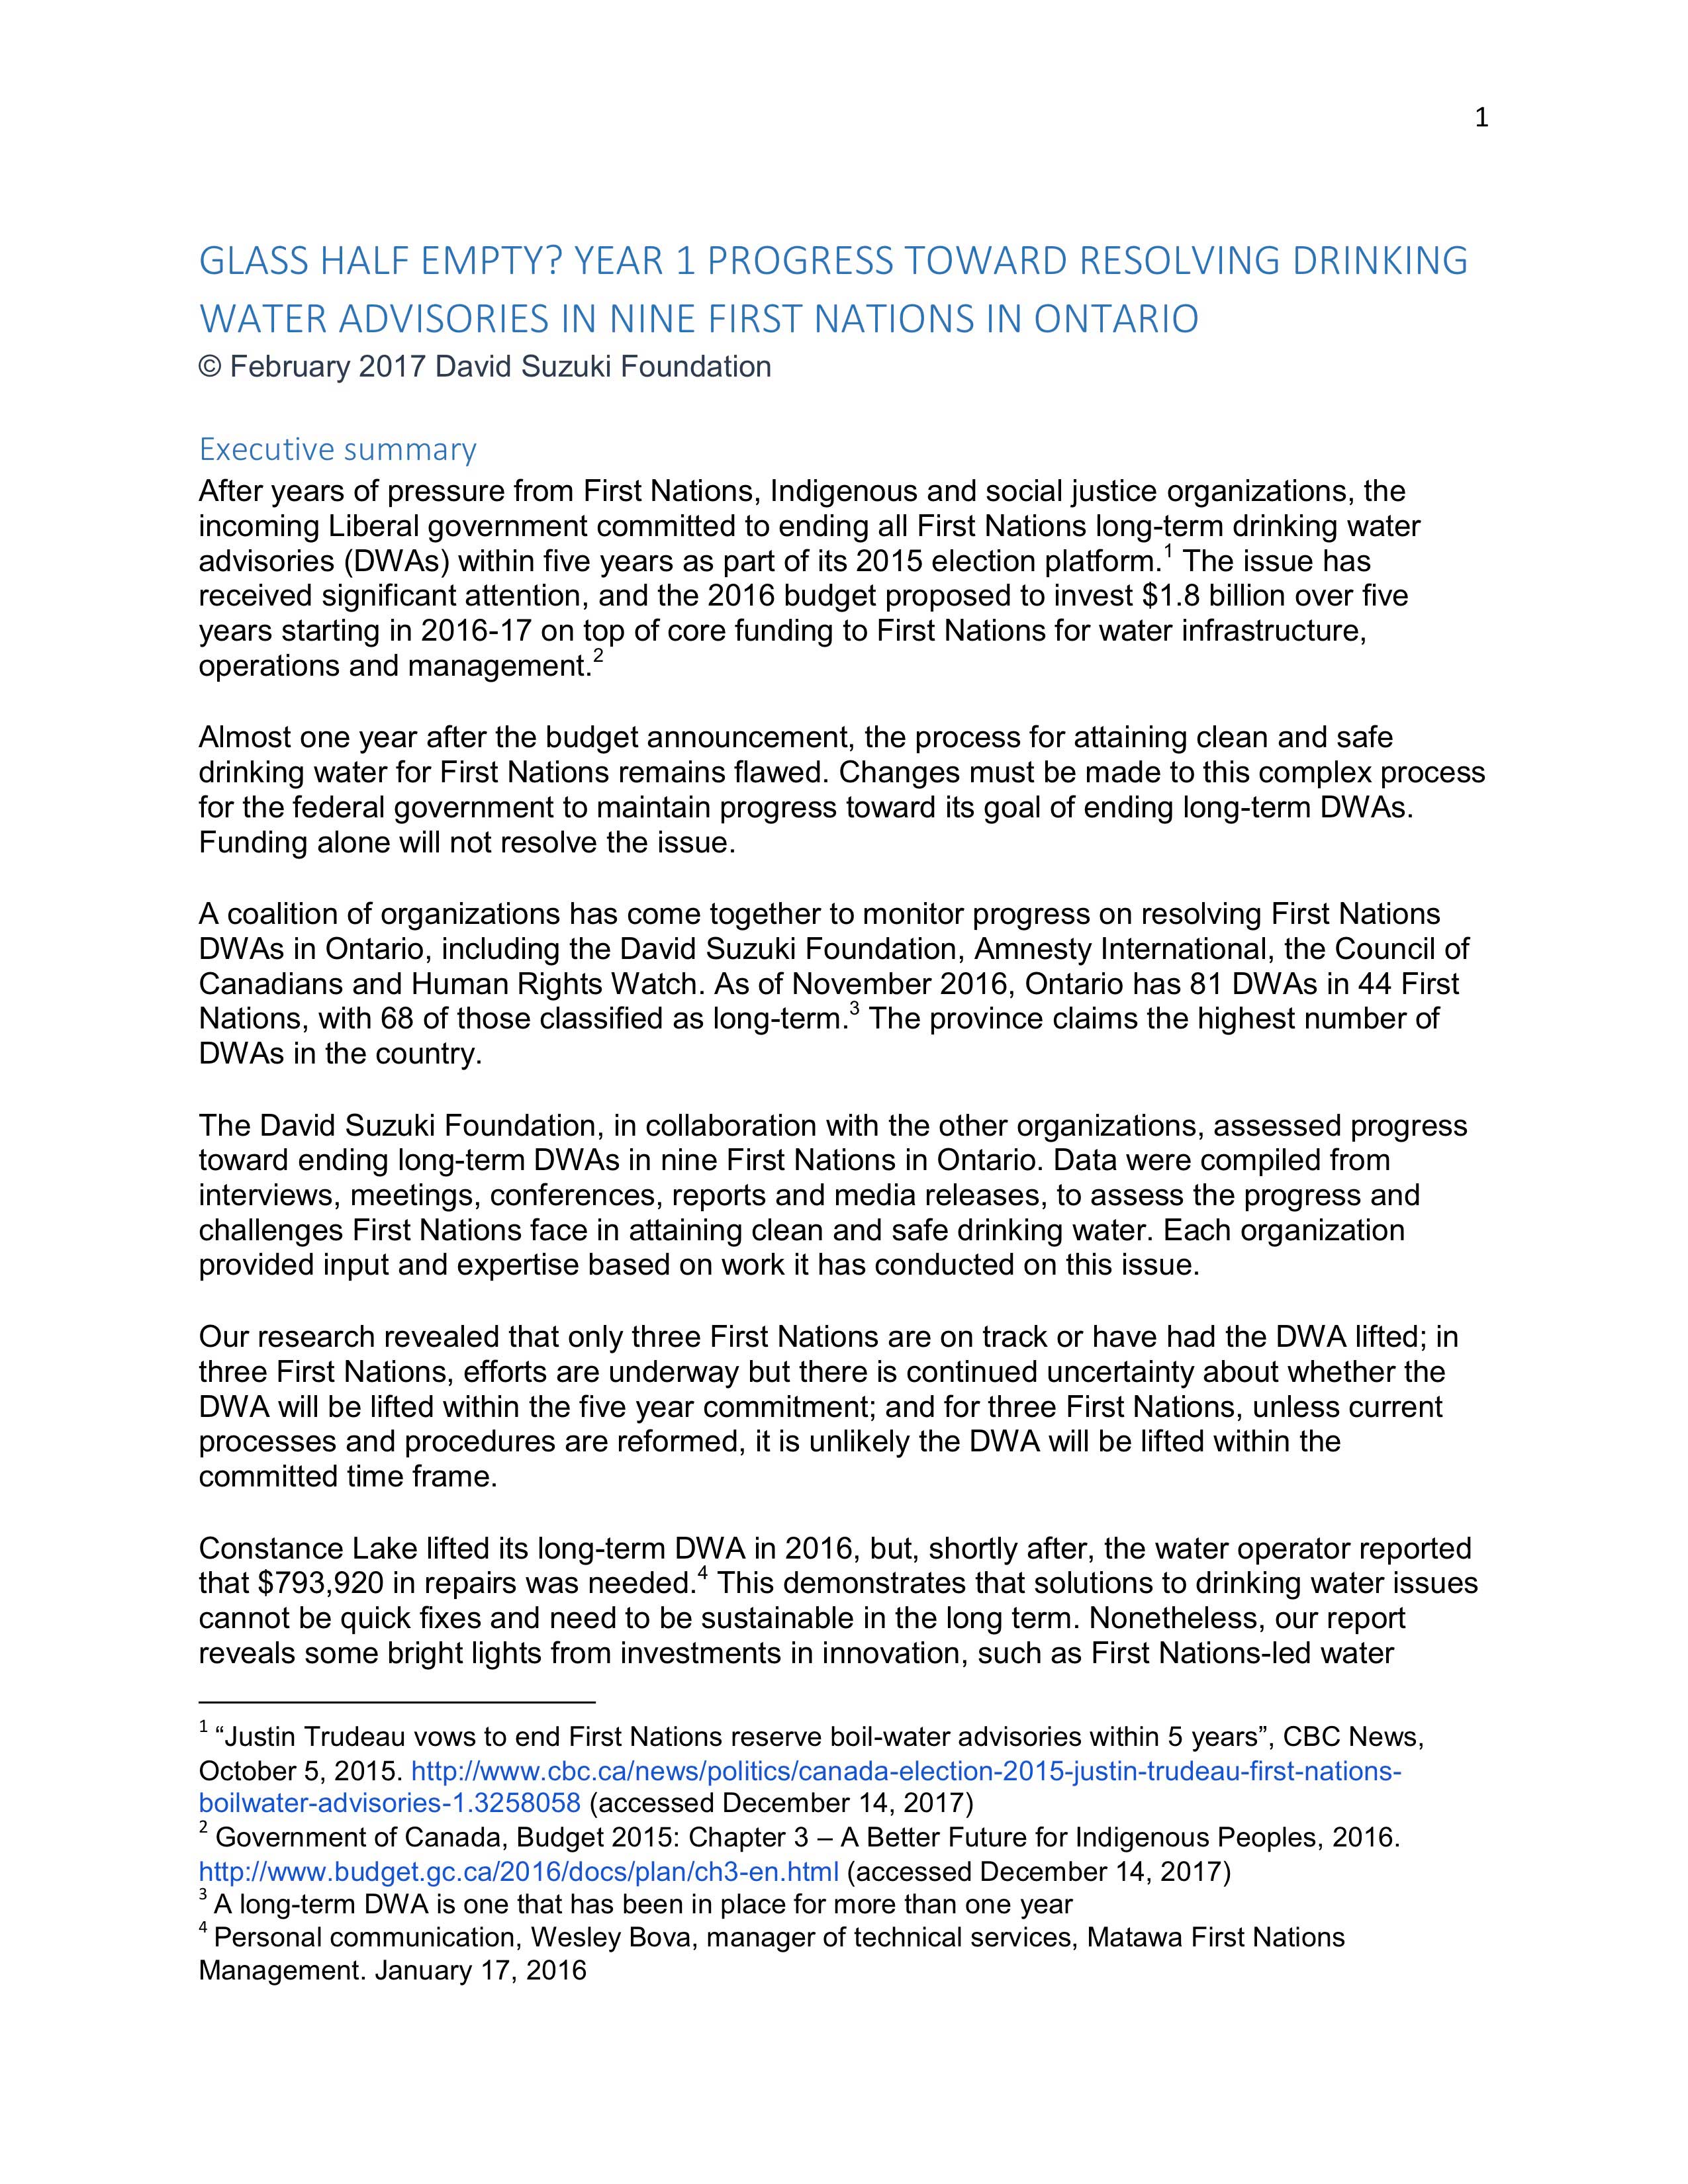 Executive summary — Glass half empty? Year 1 progress toward resolving drinking water advisories in nine First Nations in Ontario cover